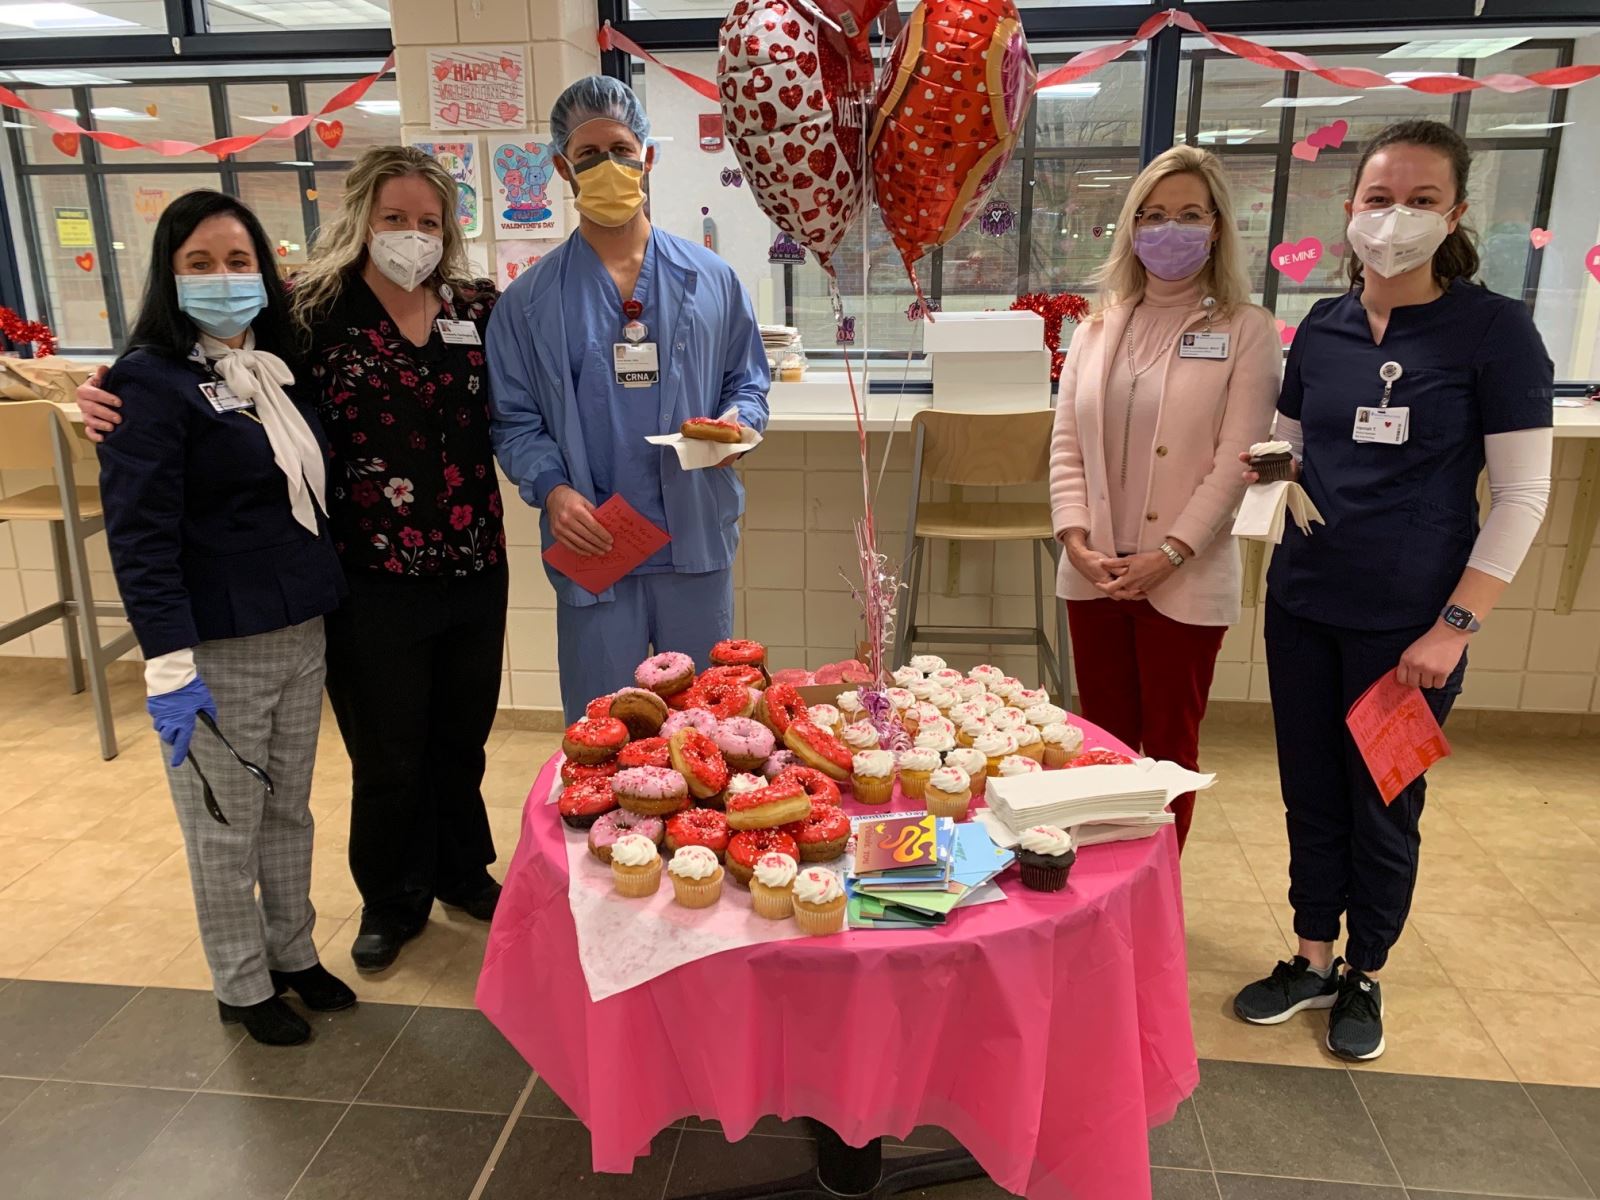 munson healthcare employees pose for a photo in the cafeteria on valentines day